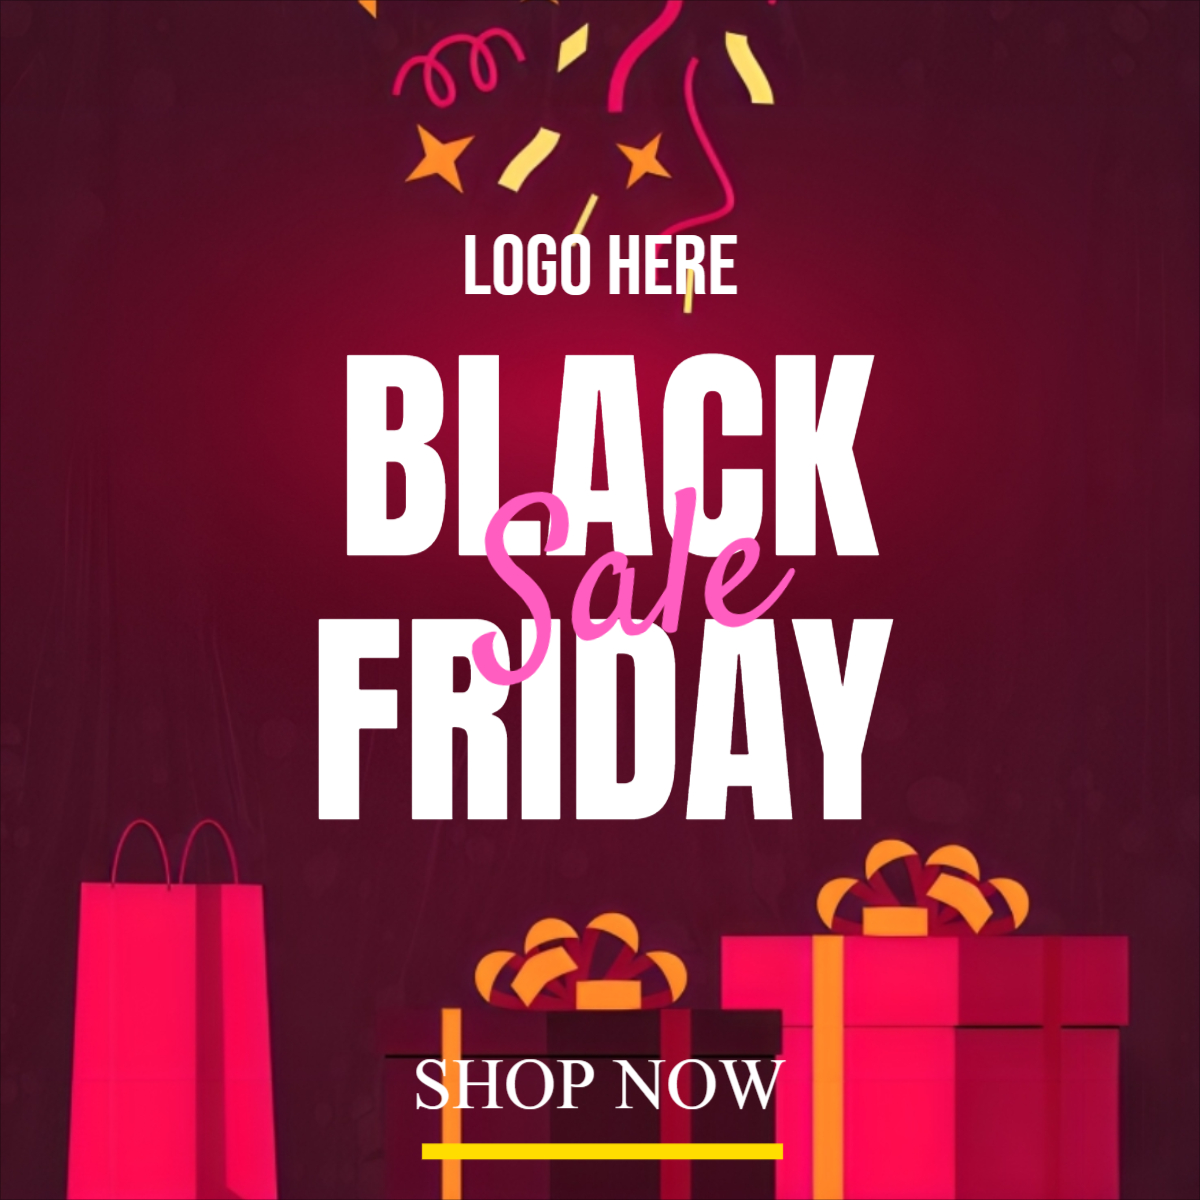 Black Friday Sale With Neon Lights Template For Free